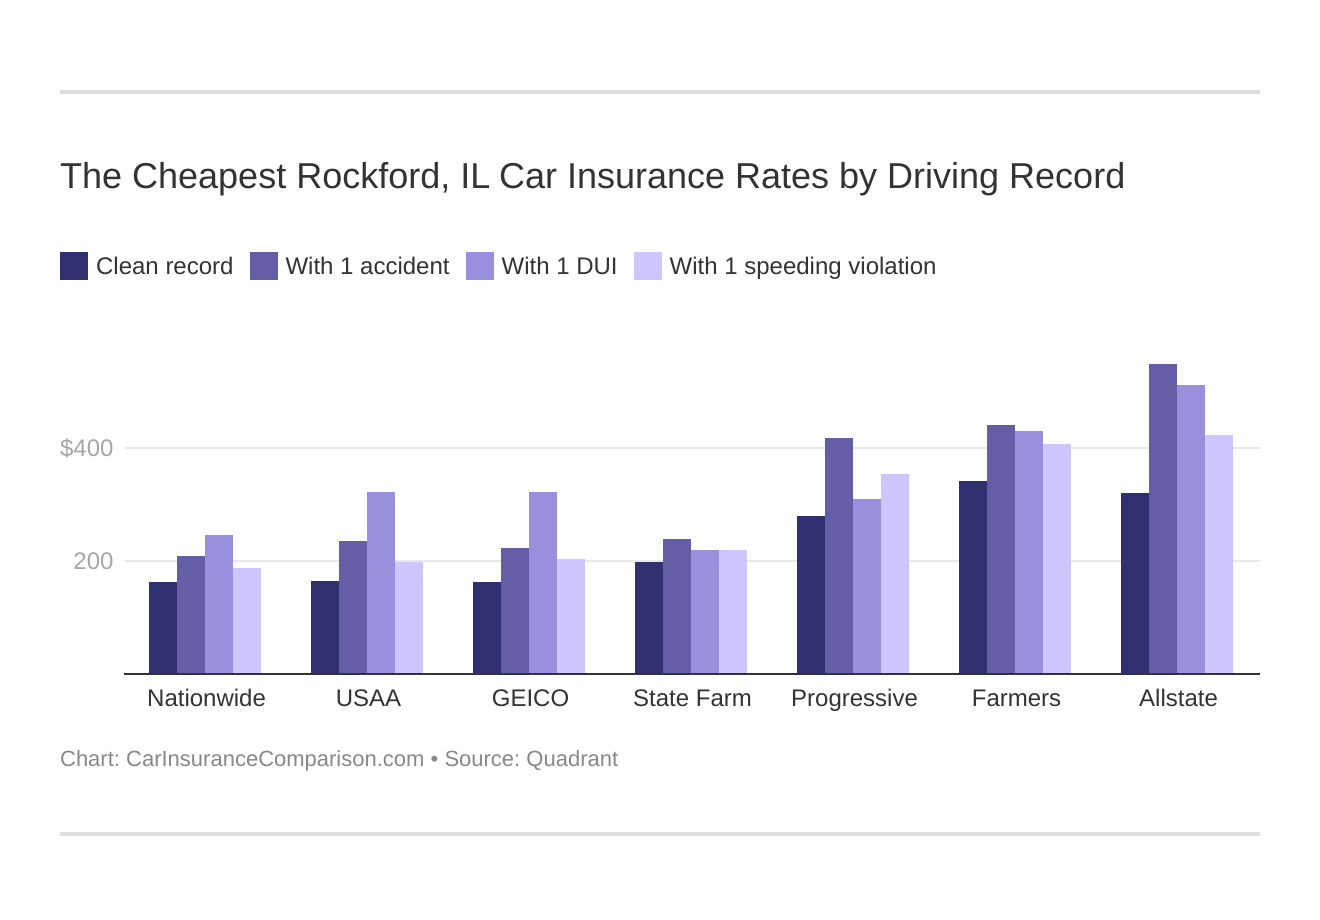 The Cheapest Rockford, IL Car Insurance Rates by Driving Record